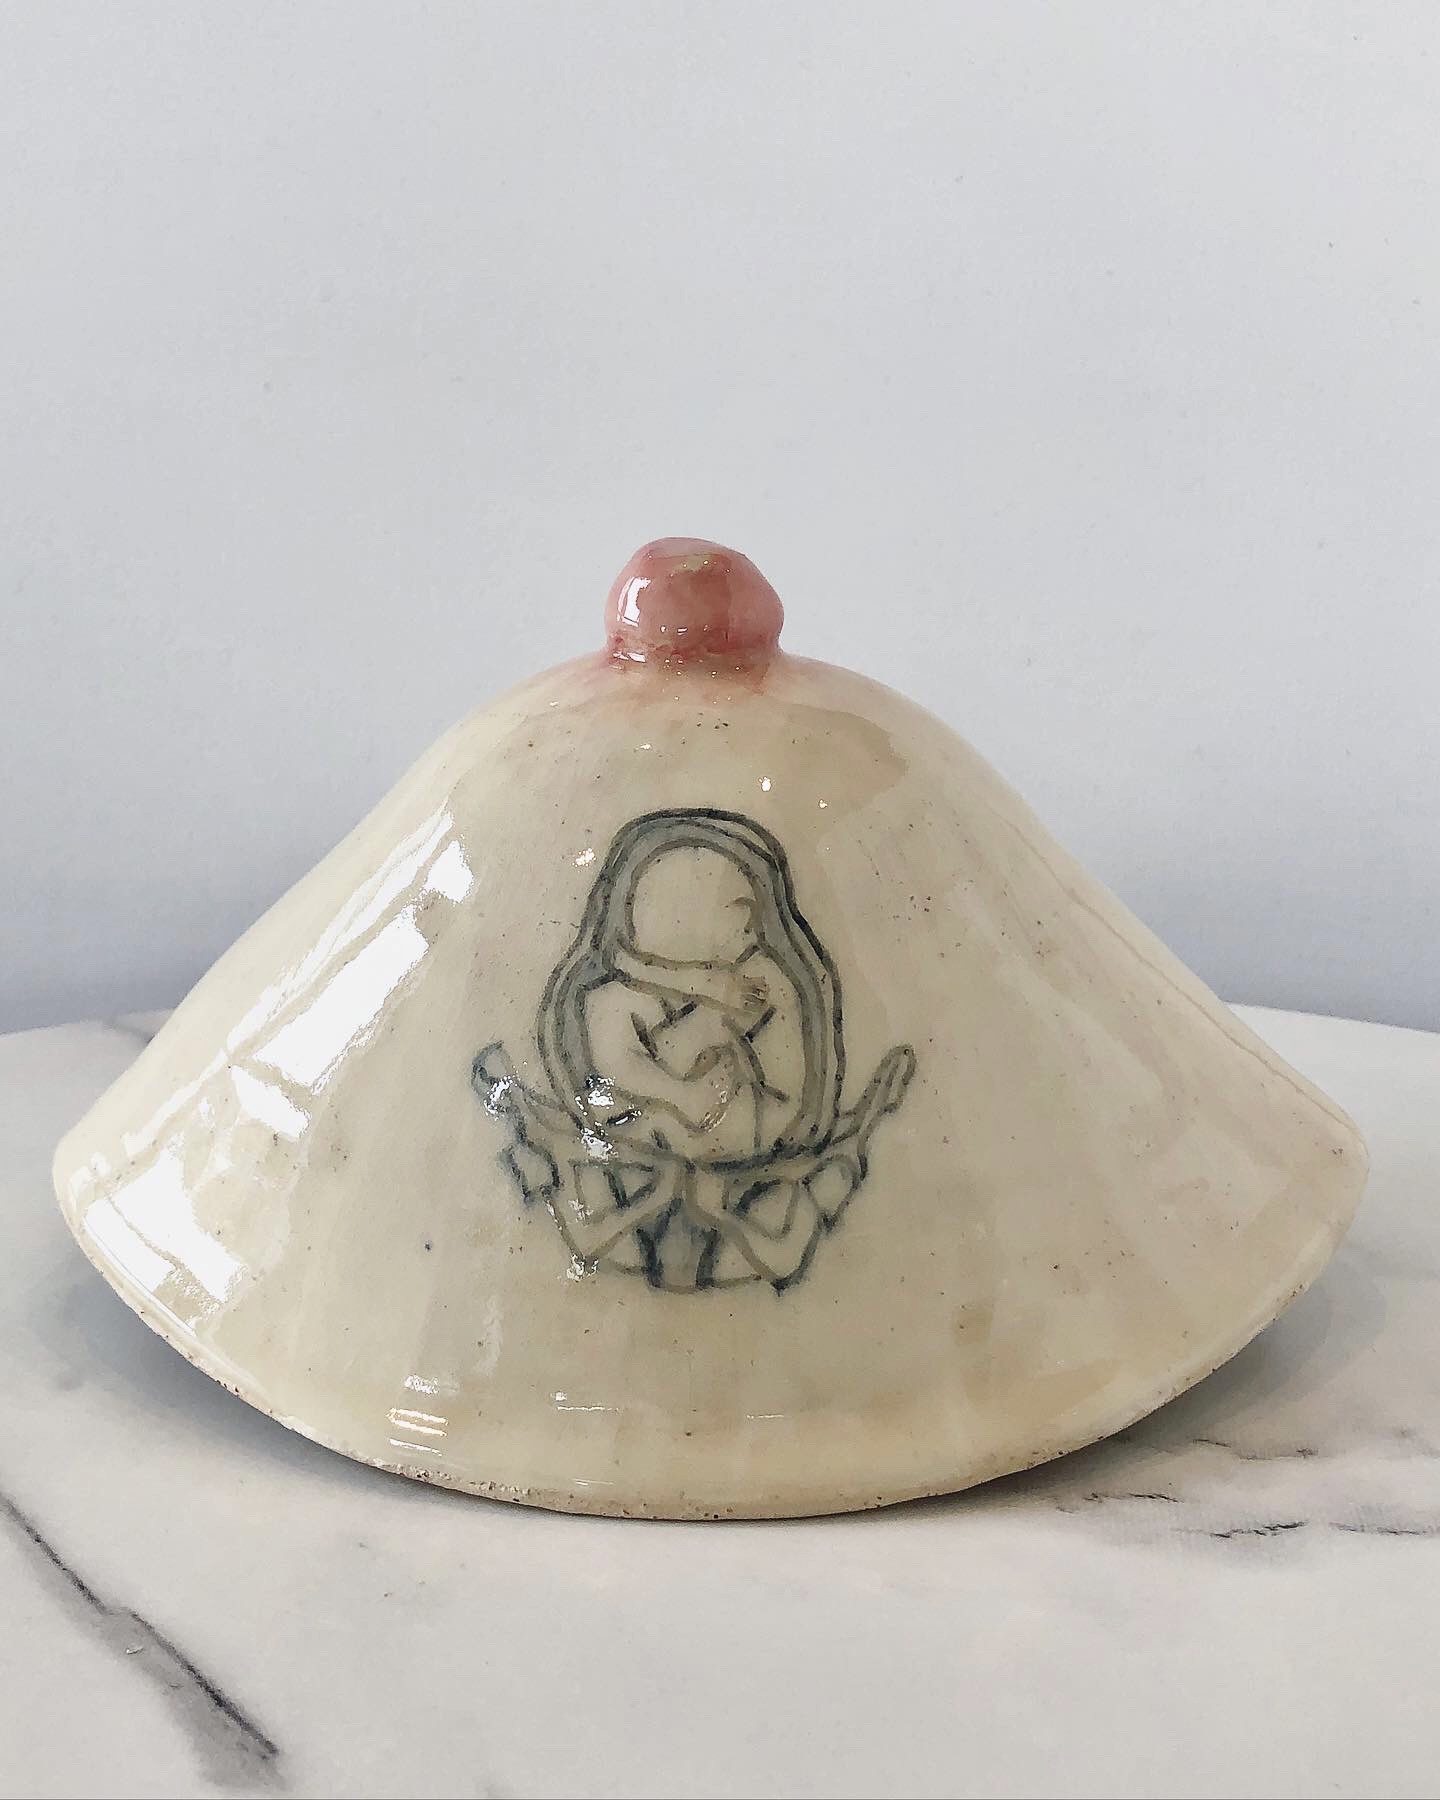 A ceramic breast sits on a table.